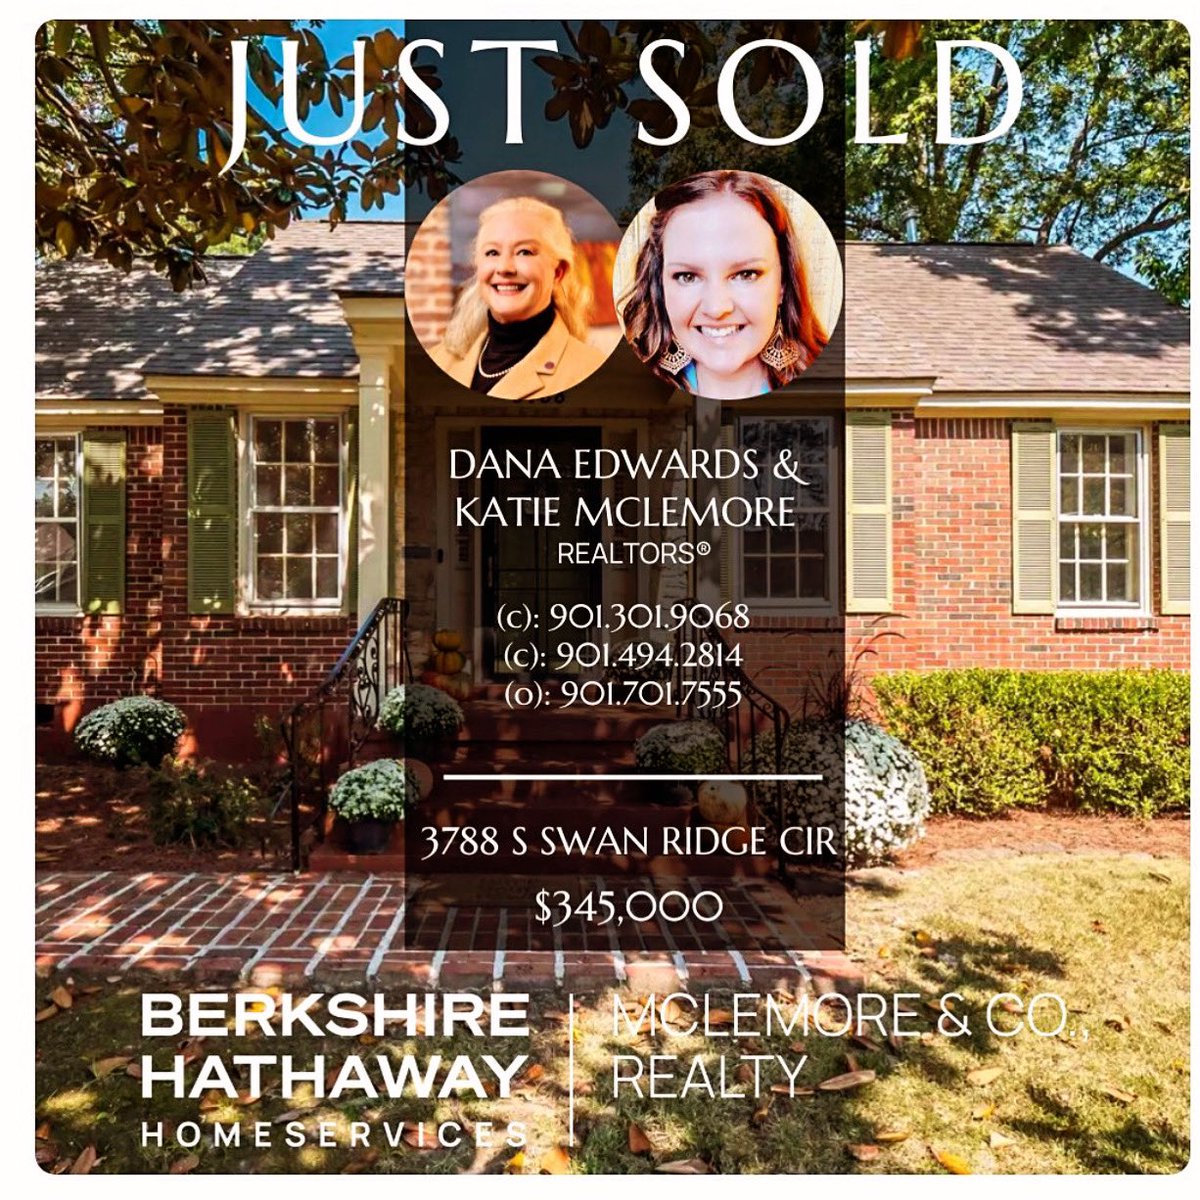 Always have so much fun helping my friends and clients!!! Who’s next?!

And added fun when I get the chance to work with my cousin! 

******************************
#901realestate #901realtor #MemphisHomesForSale #downtownmemphis #Memphis